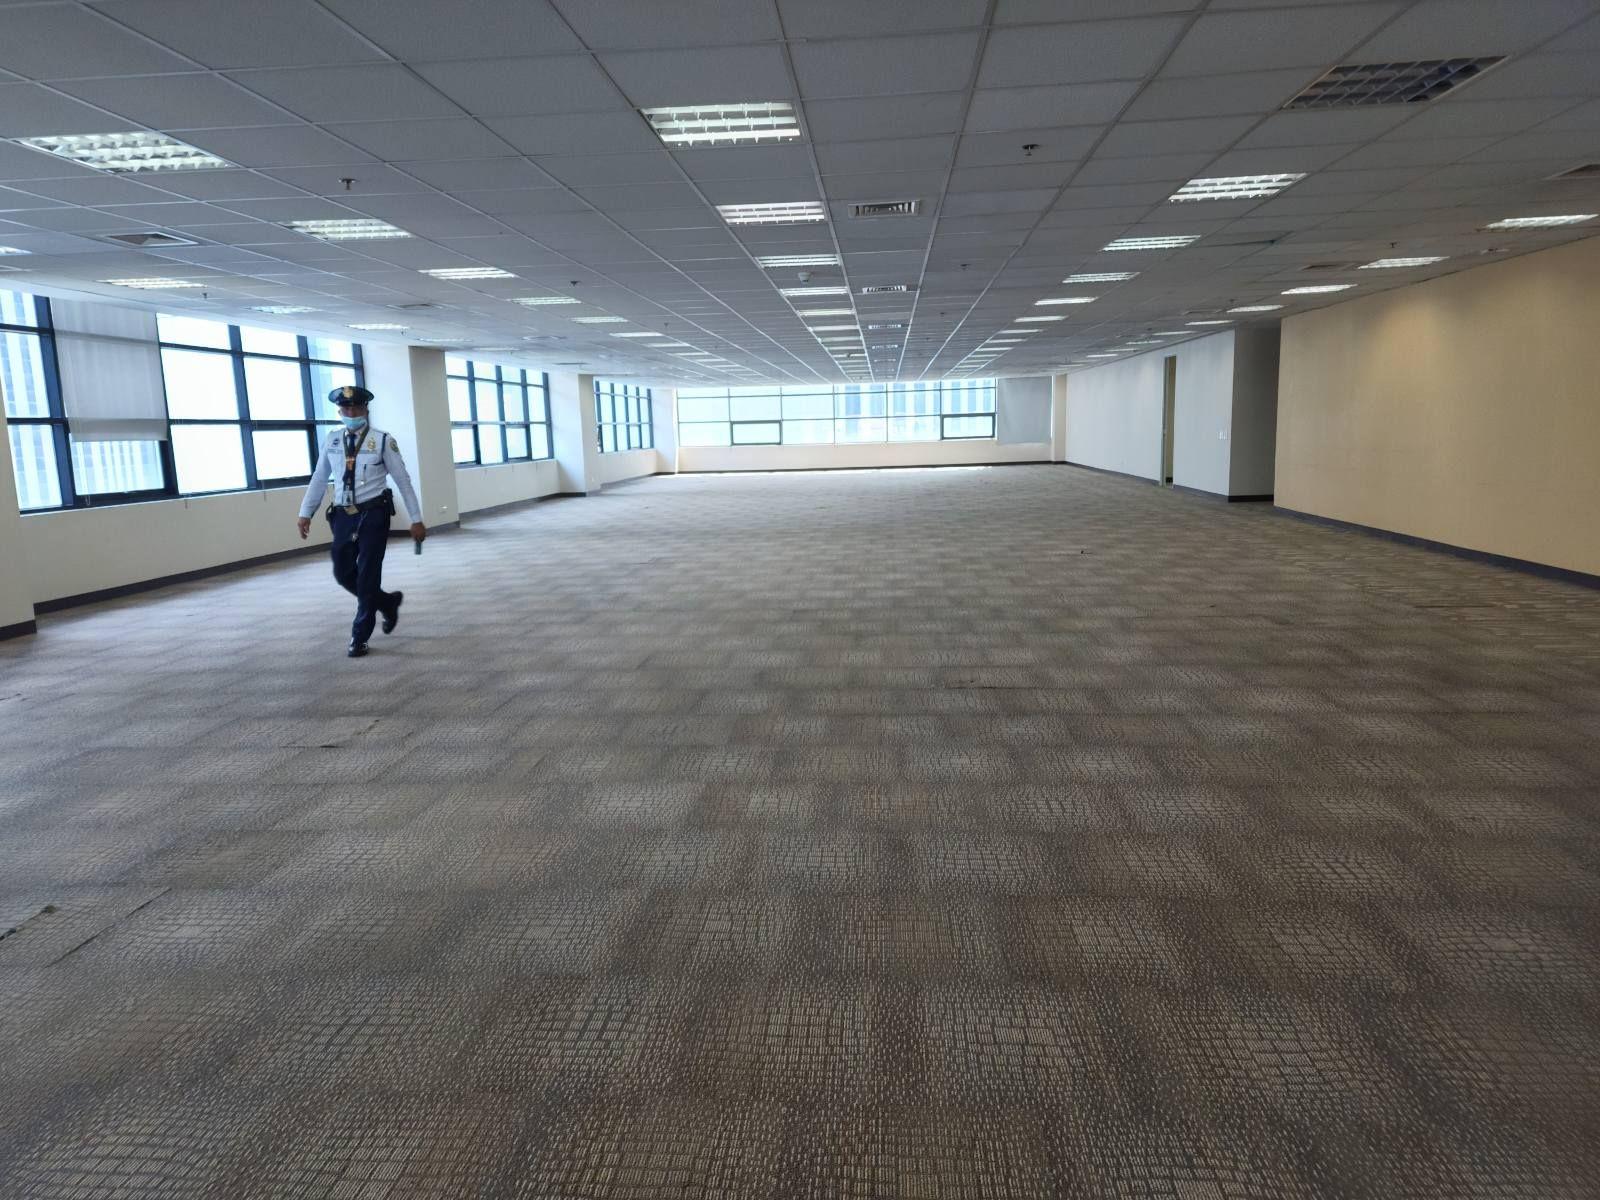 Fitted Office Space Lease Rent Alabang Muntinlupa 1500 sqm